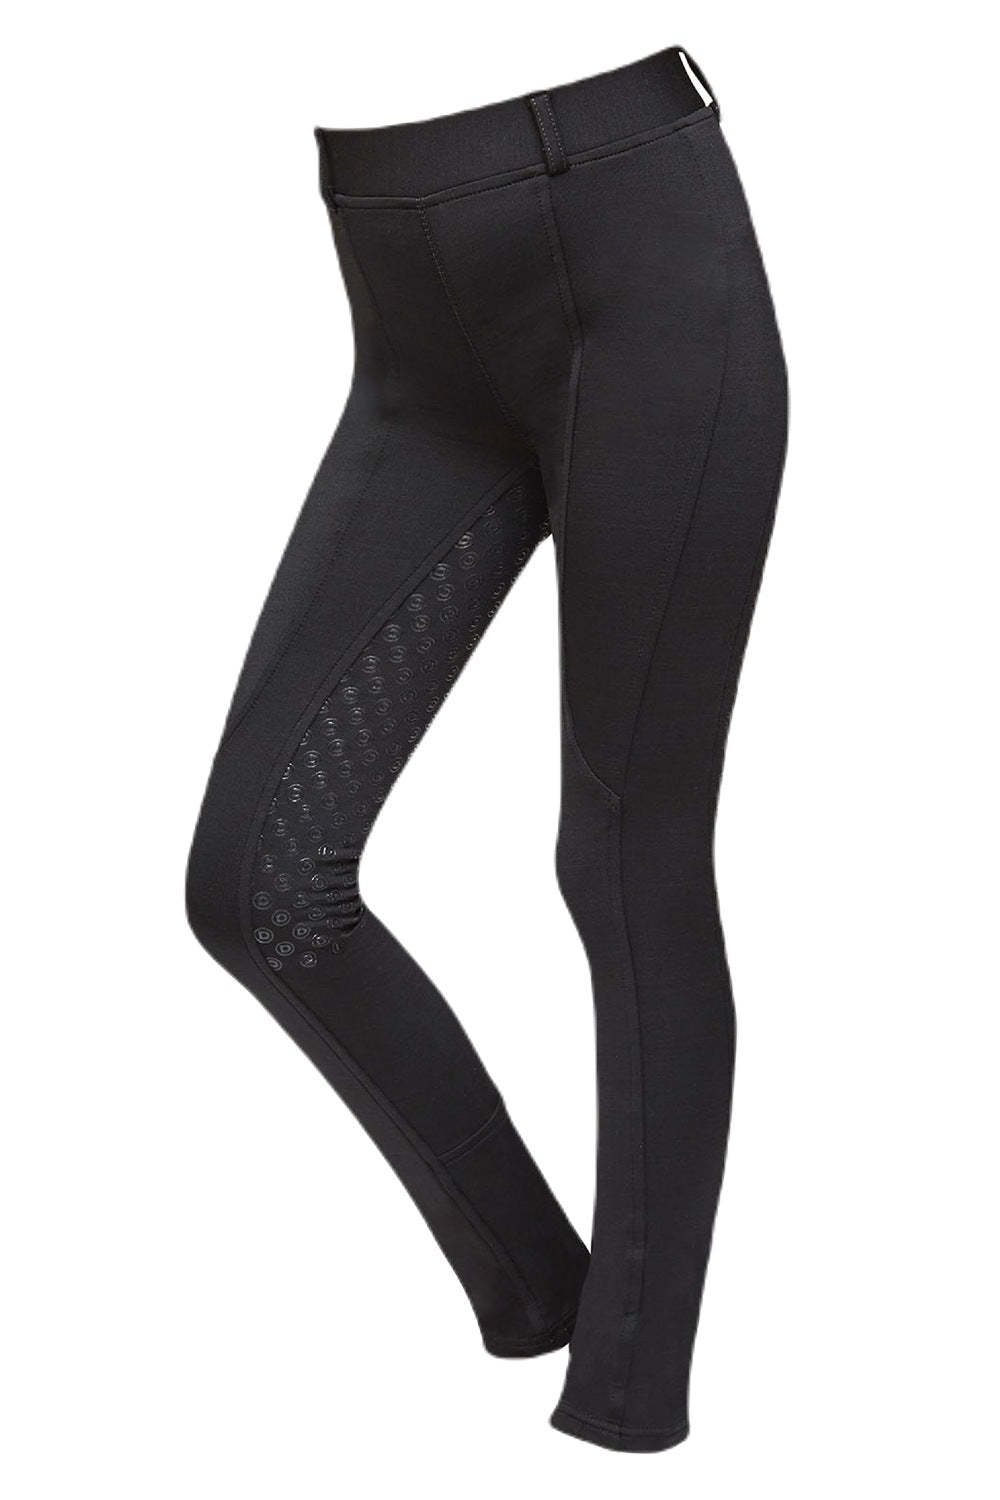 Dublin Childrens Performance Cool-It Gel Riding Tights In Black 